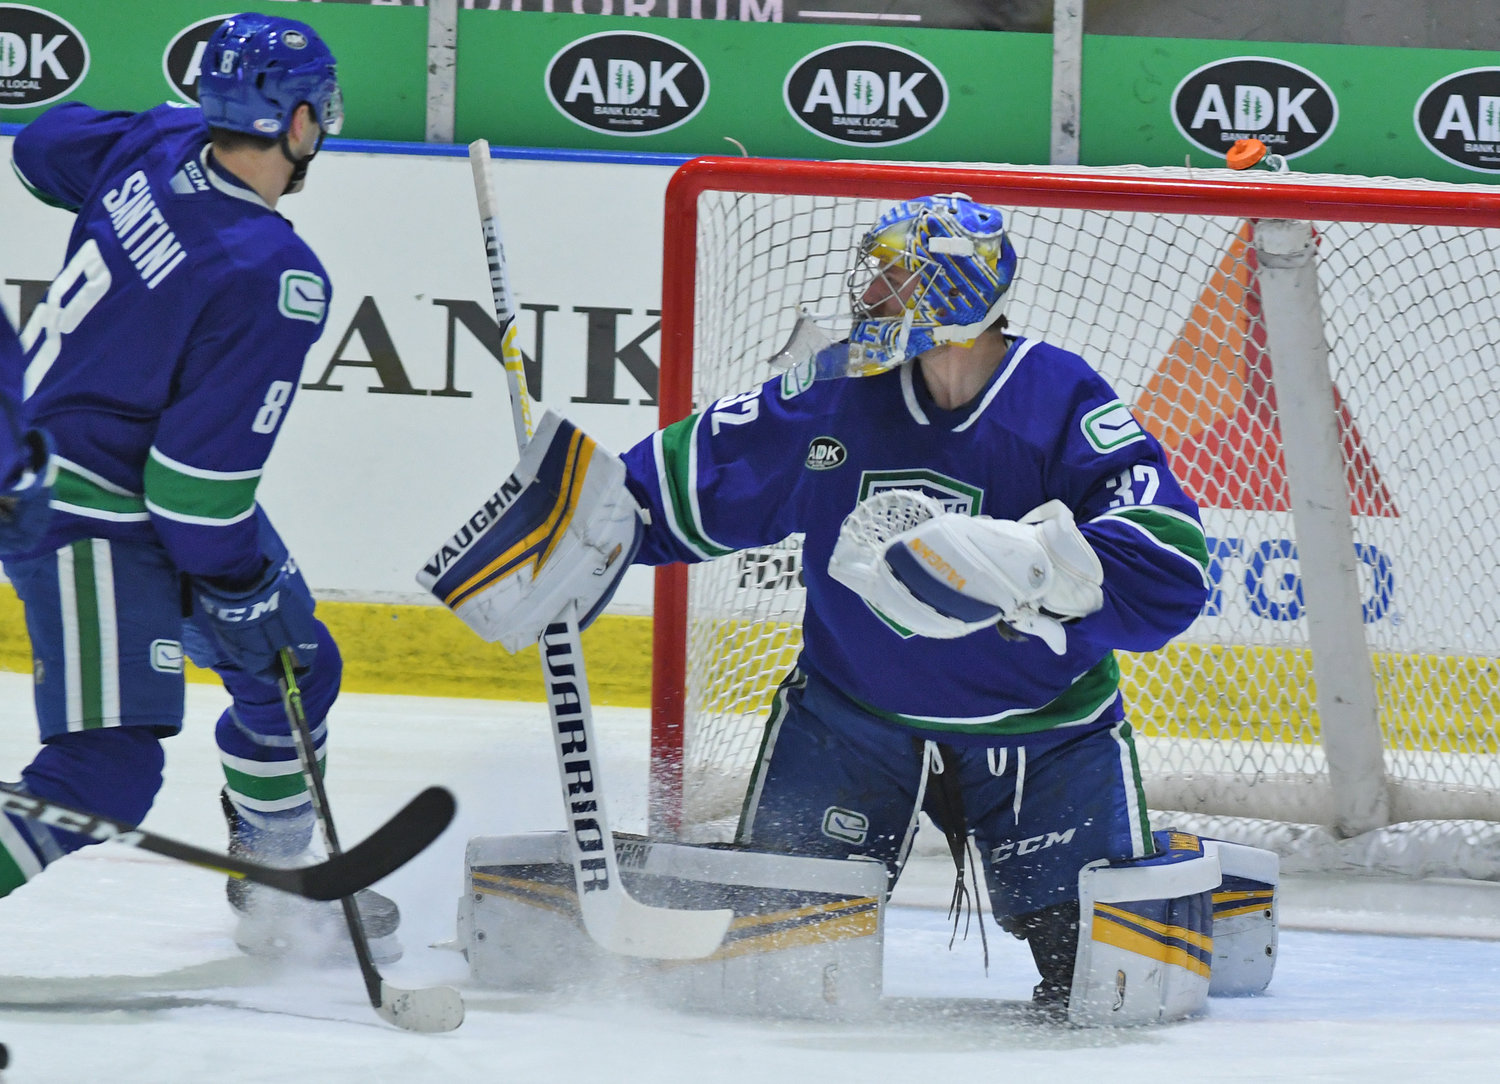 BACKSTOPPING TO A WIN — Utica Comets goalie Jon Gillies reacts to a shot as defenseman Steve Santini helps protect the net in Wednesday’s home opener against the Syracuse Crunch. Gillies stopped 17 shots to earn the win for the Comets in net.